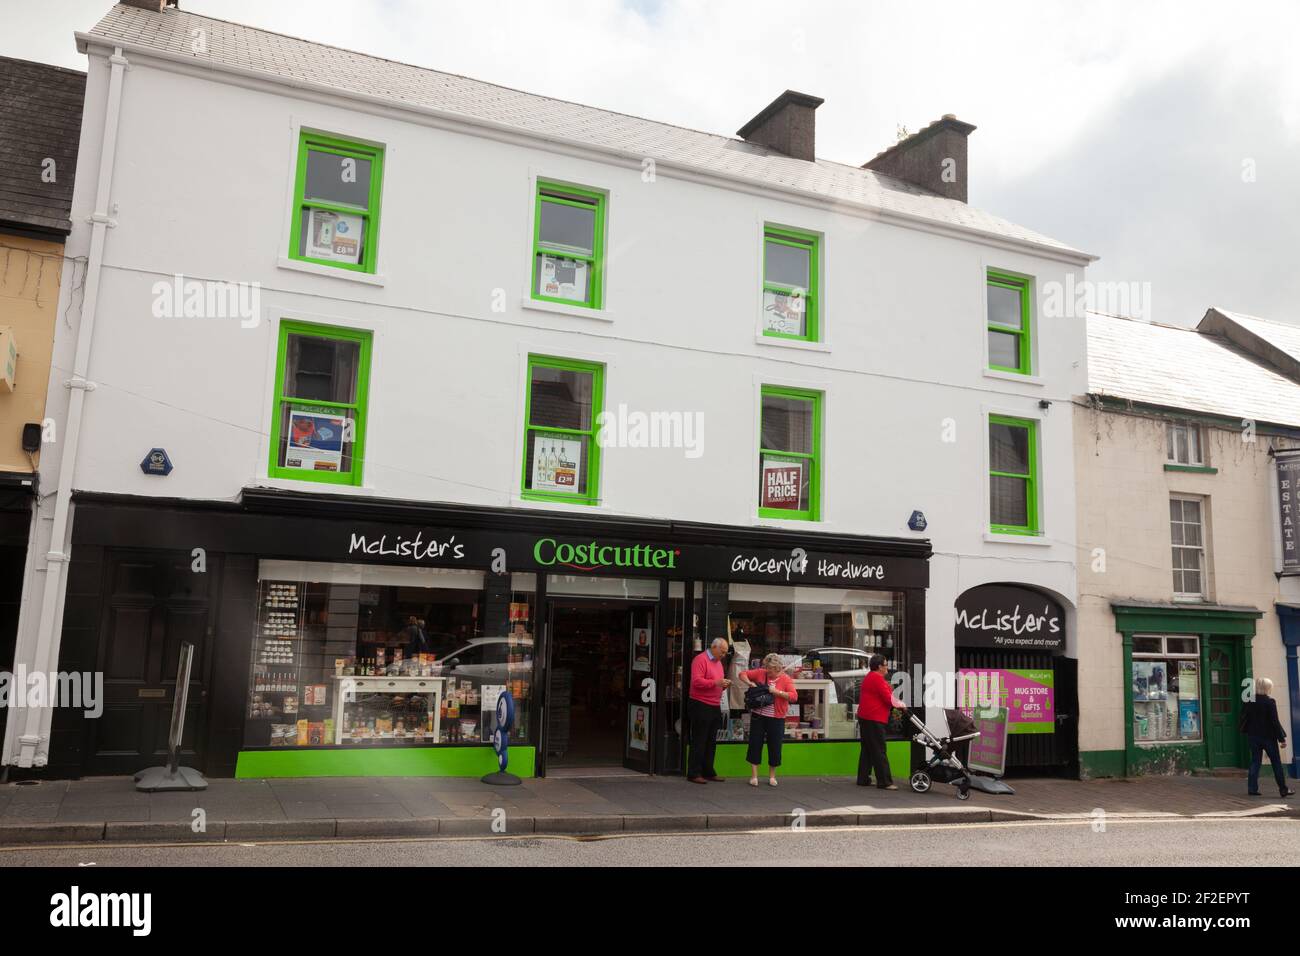 McLister's Costcutter Grocery & Hardware, Ballycastle, Moyle, County Antrim, Irlande du Nord, ROYAUME-UNI Banque D'Images